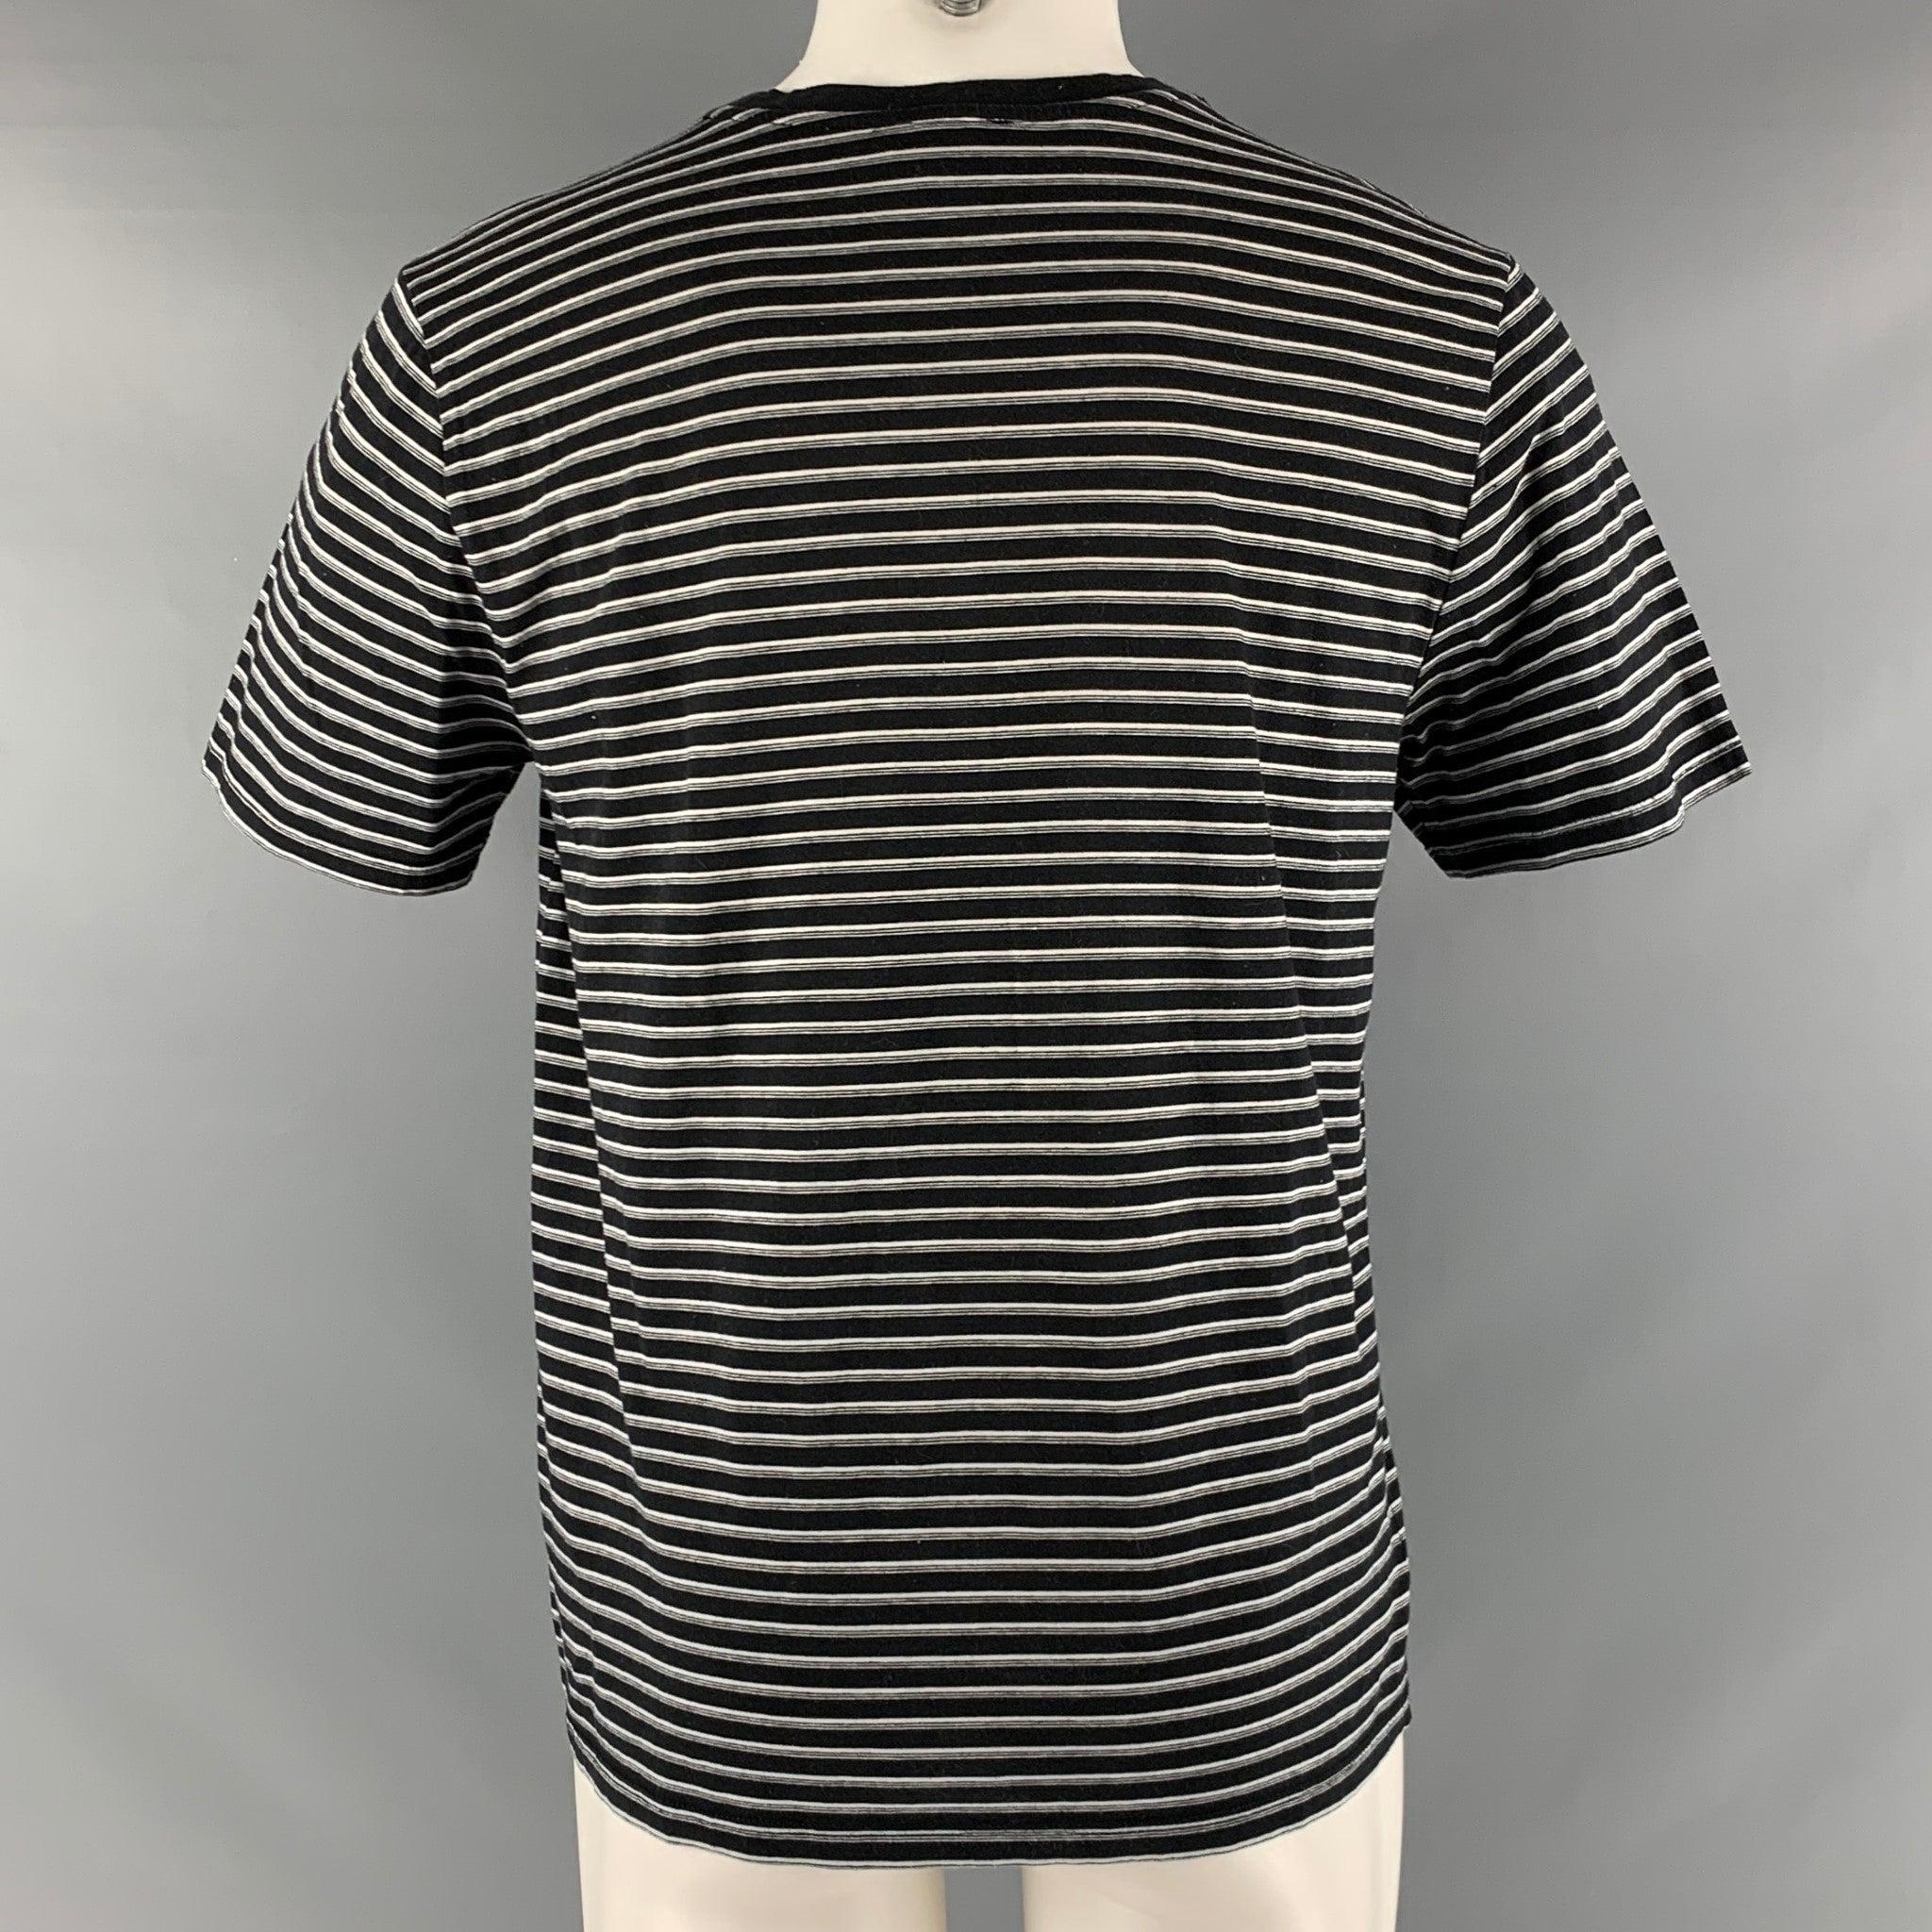 A.P.C. Size M Black White Stripe Cotton Short Sleeve T-shirt In Good Condition For Sale In San Francisco, CA